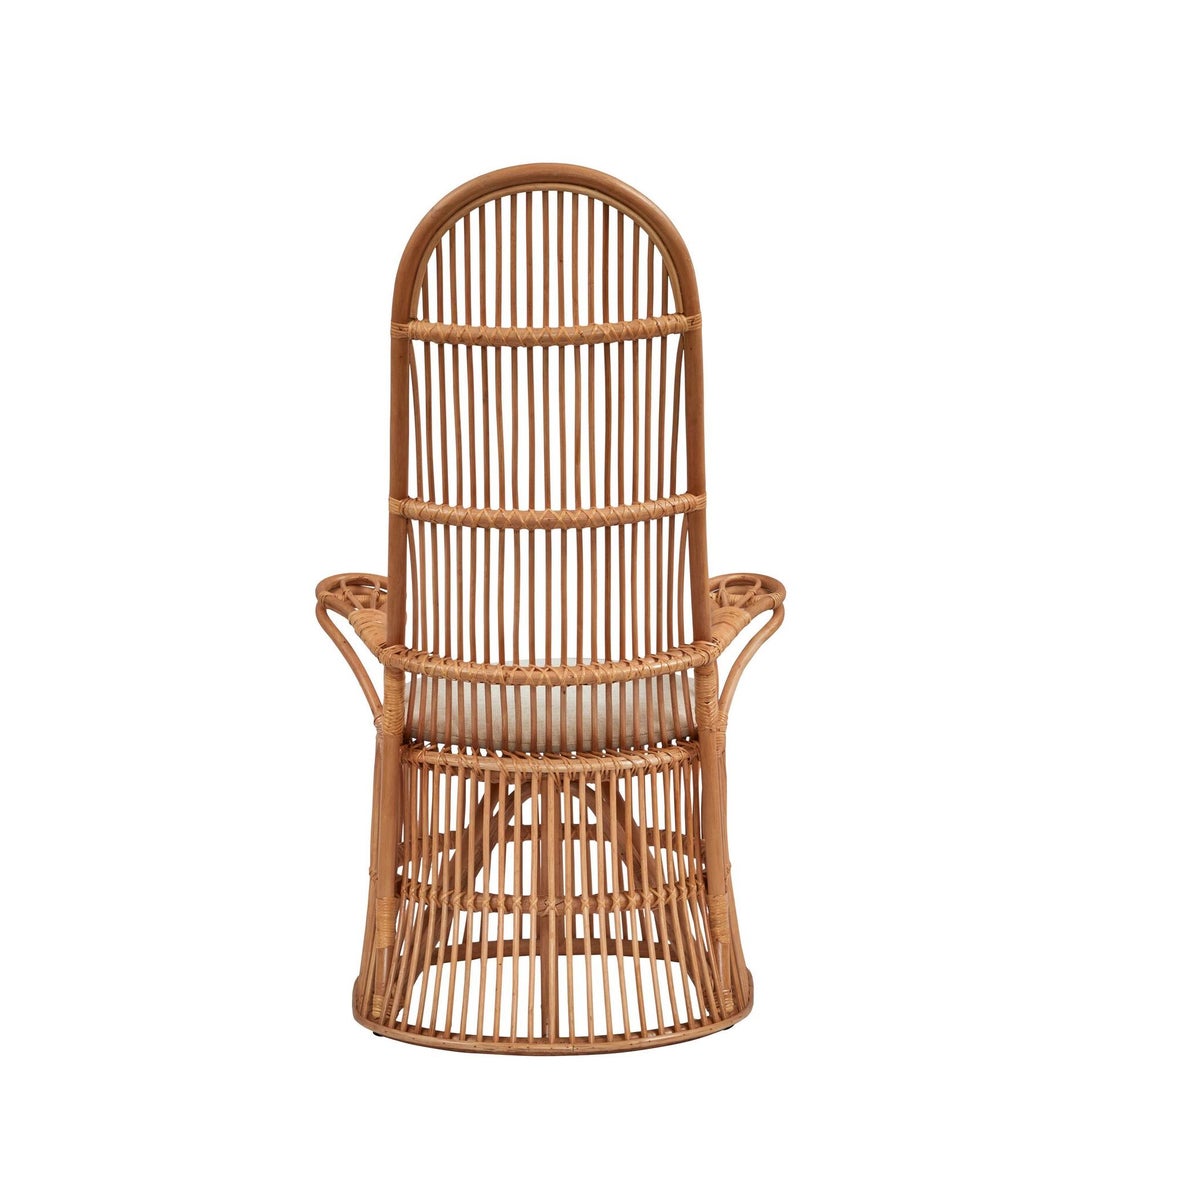 French High Back Chair Rattan Frame - Natural Cushion Color - Cream This Item Will Be Discontinu